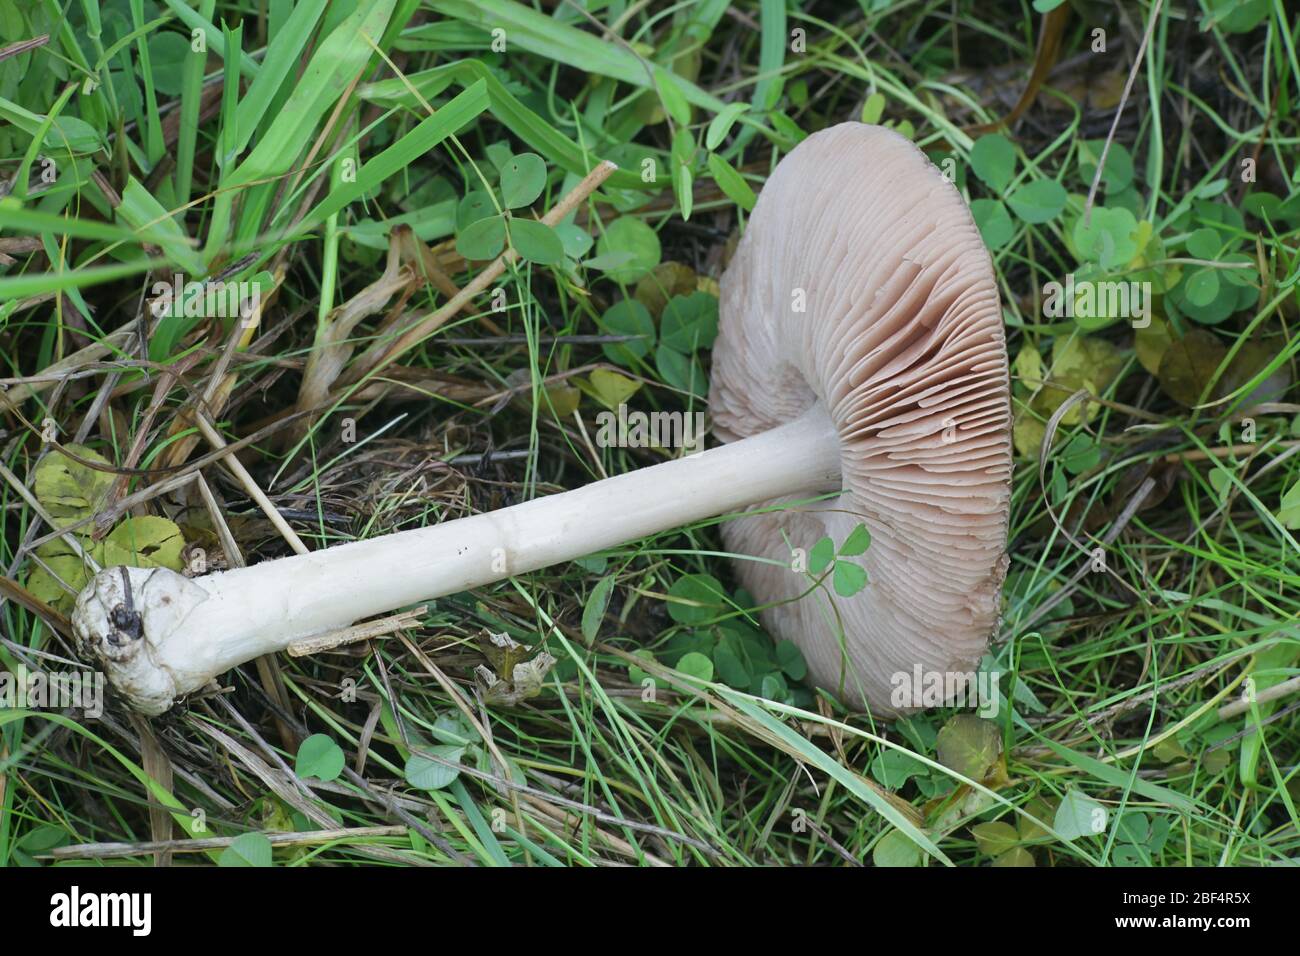 Volvopluteus gloiocephalus, known as the big sheath mushroom, rose-gilled grisette, or stubble rosegill, wild mushrooms from Finland Stock Photo